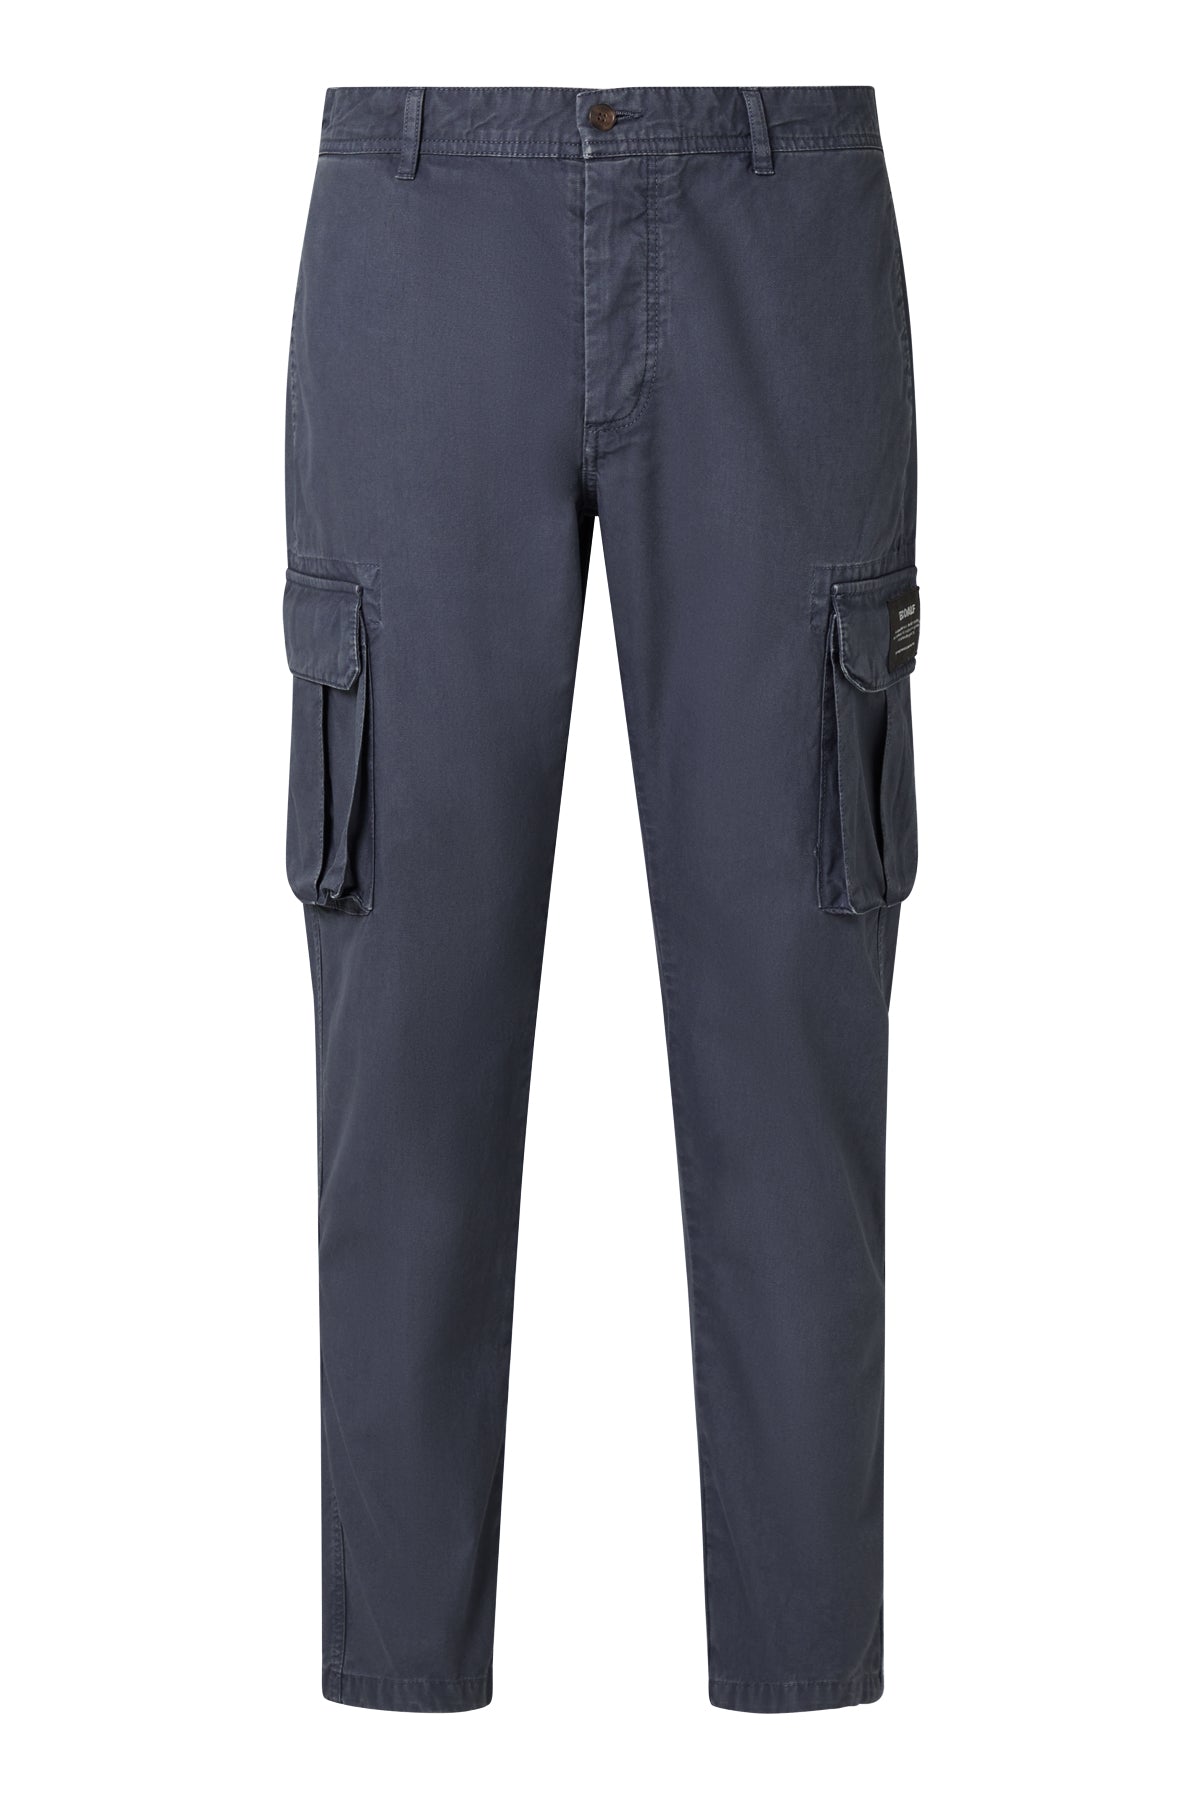 Buy Navy blue Trousers & Pants for Men by URBANO PLUS Online | Ajio.com